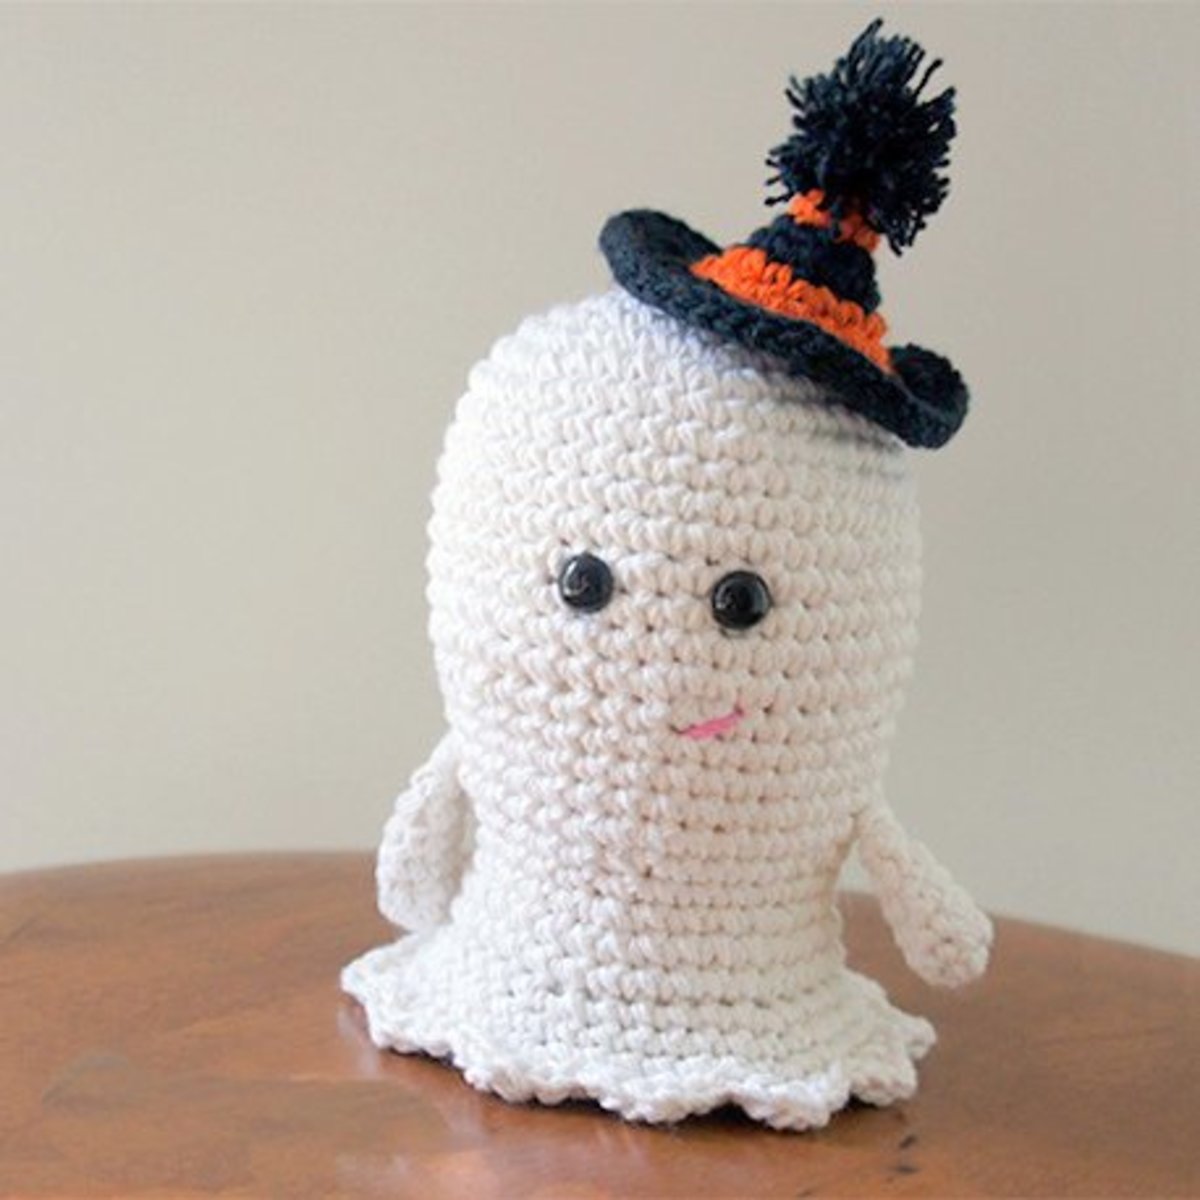 25 Free Halloween Ghost Crochet Patterns | HubPages